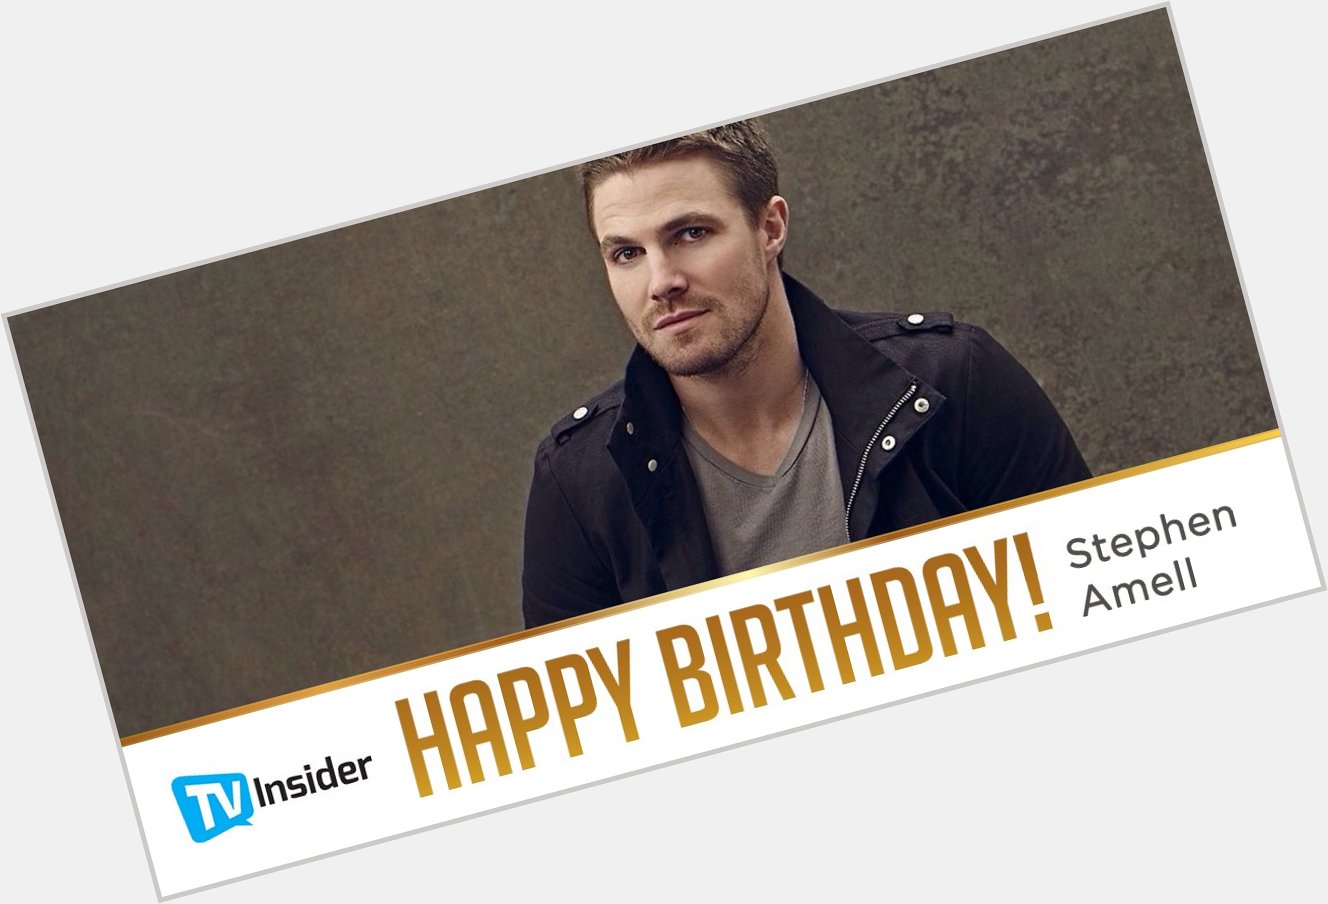 Our is pointing at Oliver! Happy birthday, Stephen Amell. 